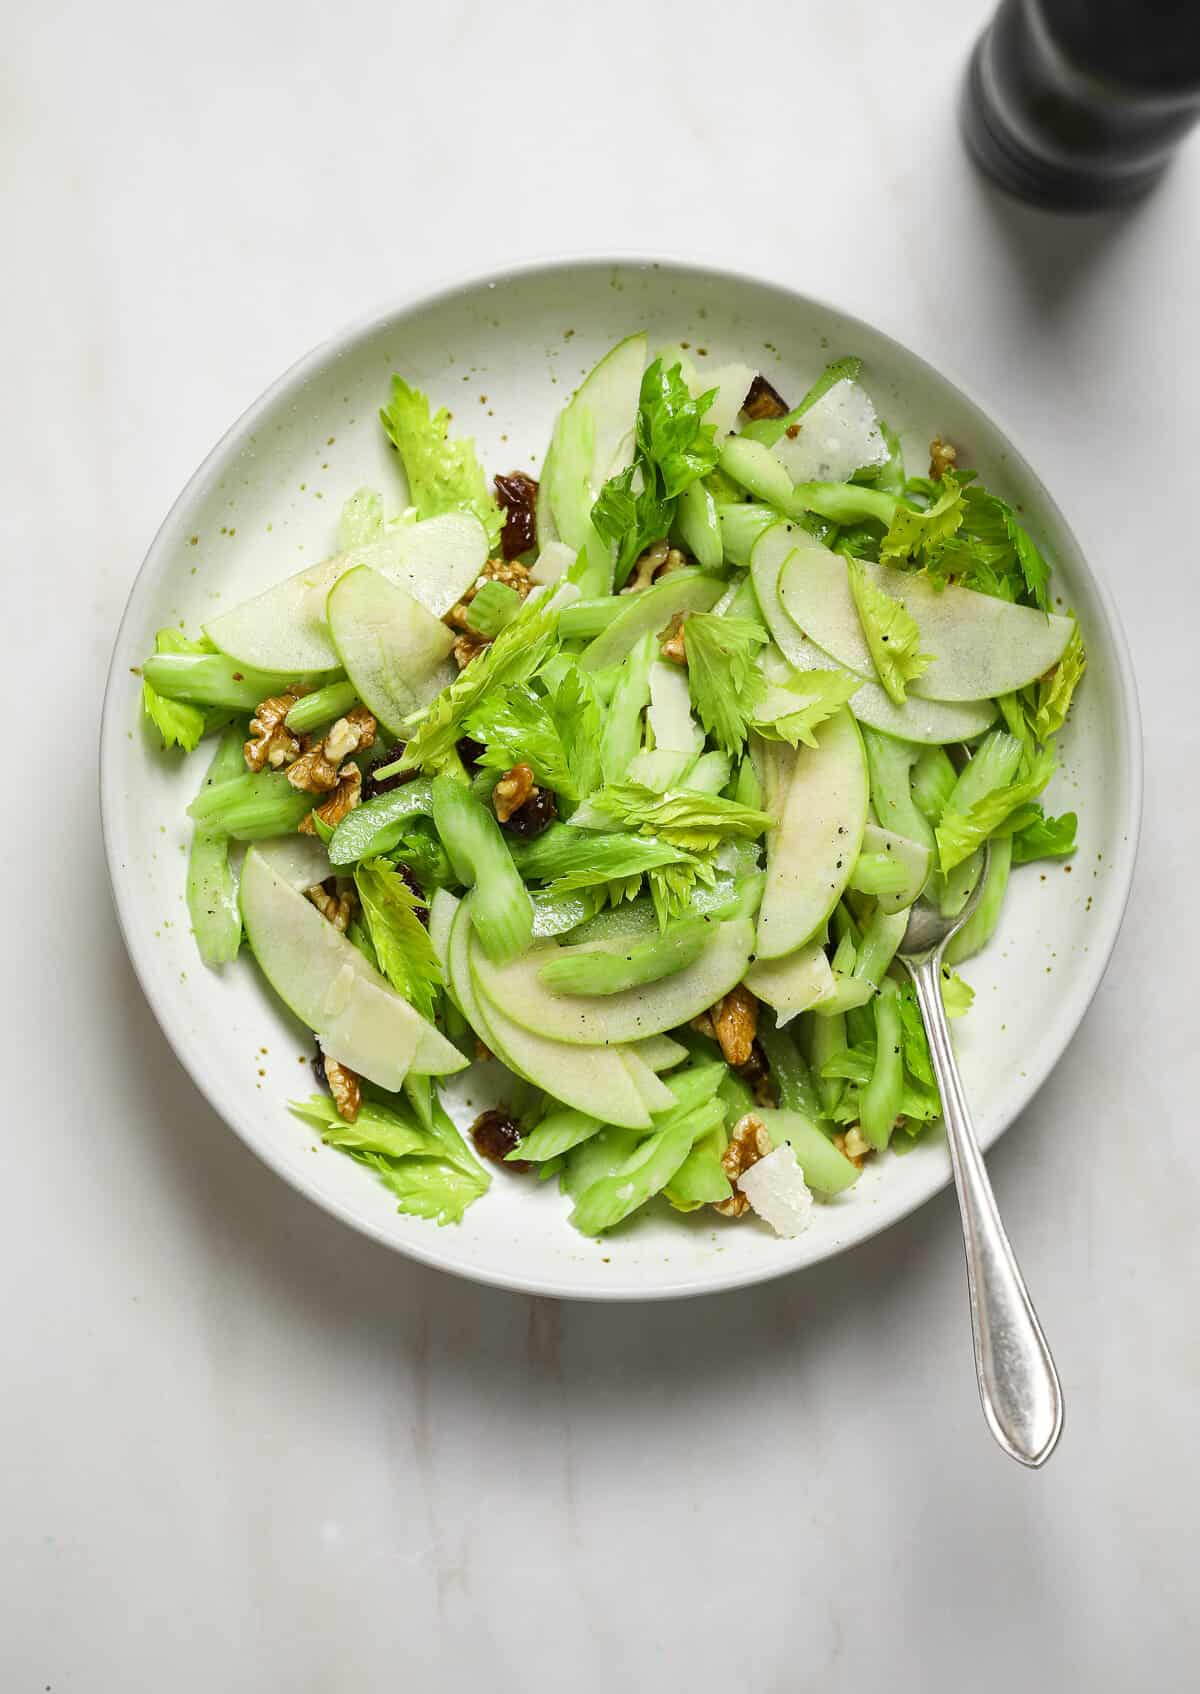 A white, speckled ceramic bowl filled with a salad made up of sliced celery and apple.